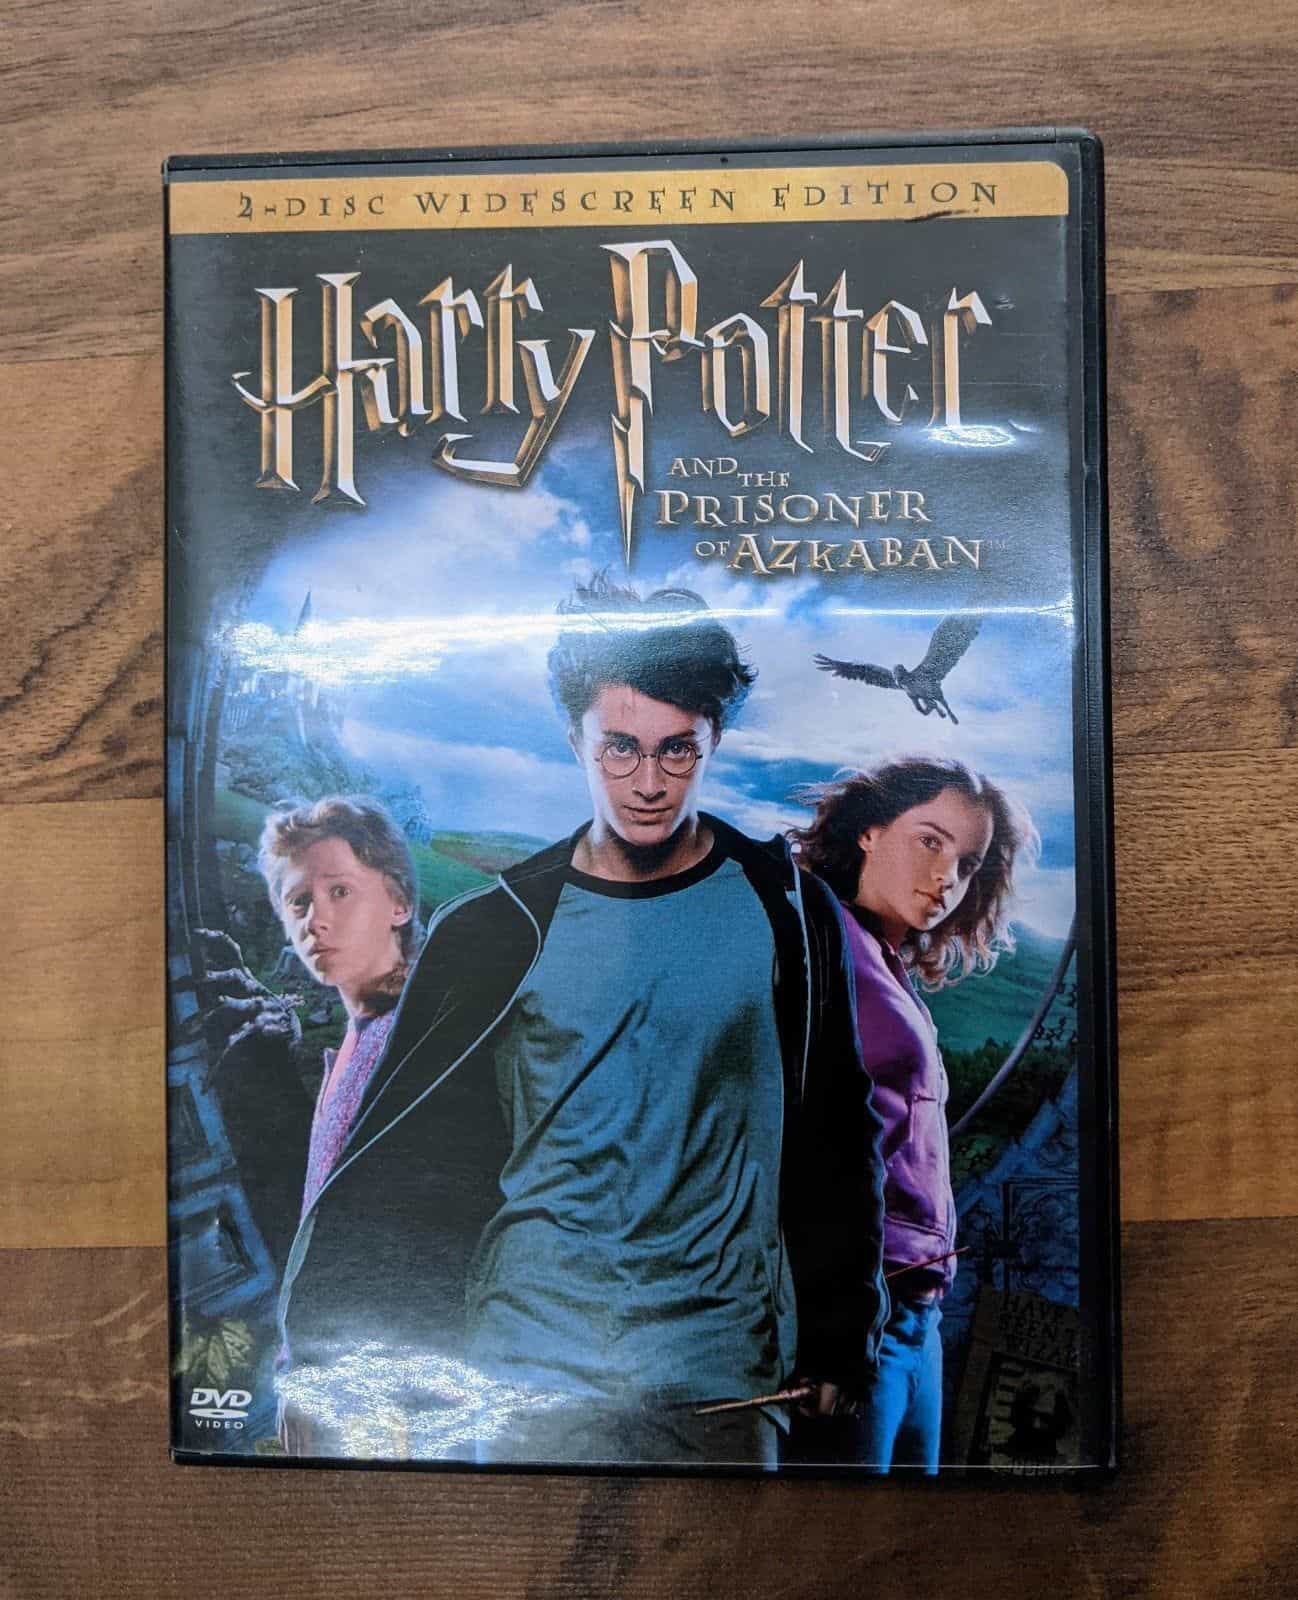 Harry Potter And The Prisoner of Azkaban DVD Movie – 2-disc Wide Screen Edition